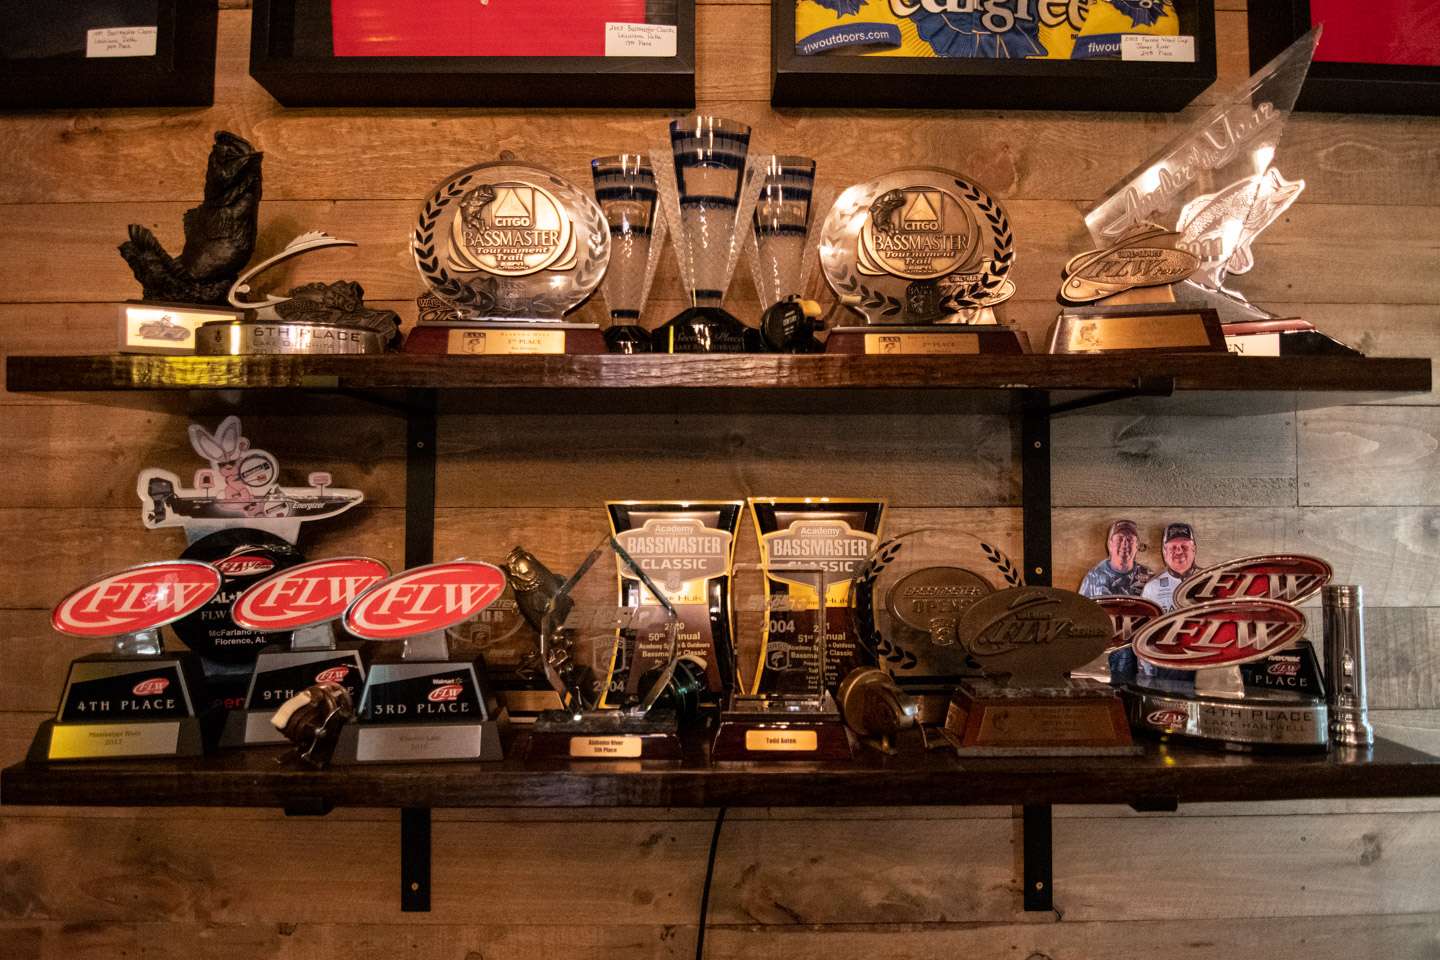 The trophy shelves. are full of Auten’s accomplishments over the years as an angler. 